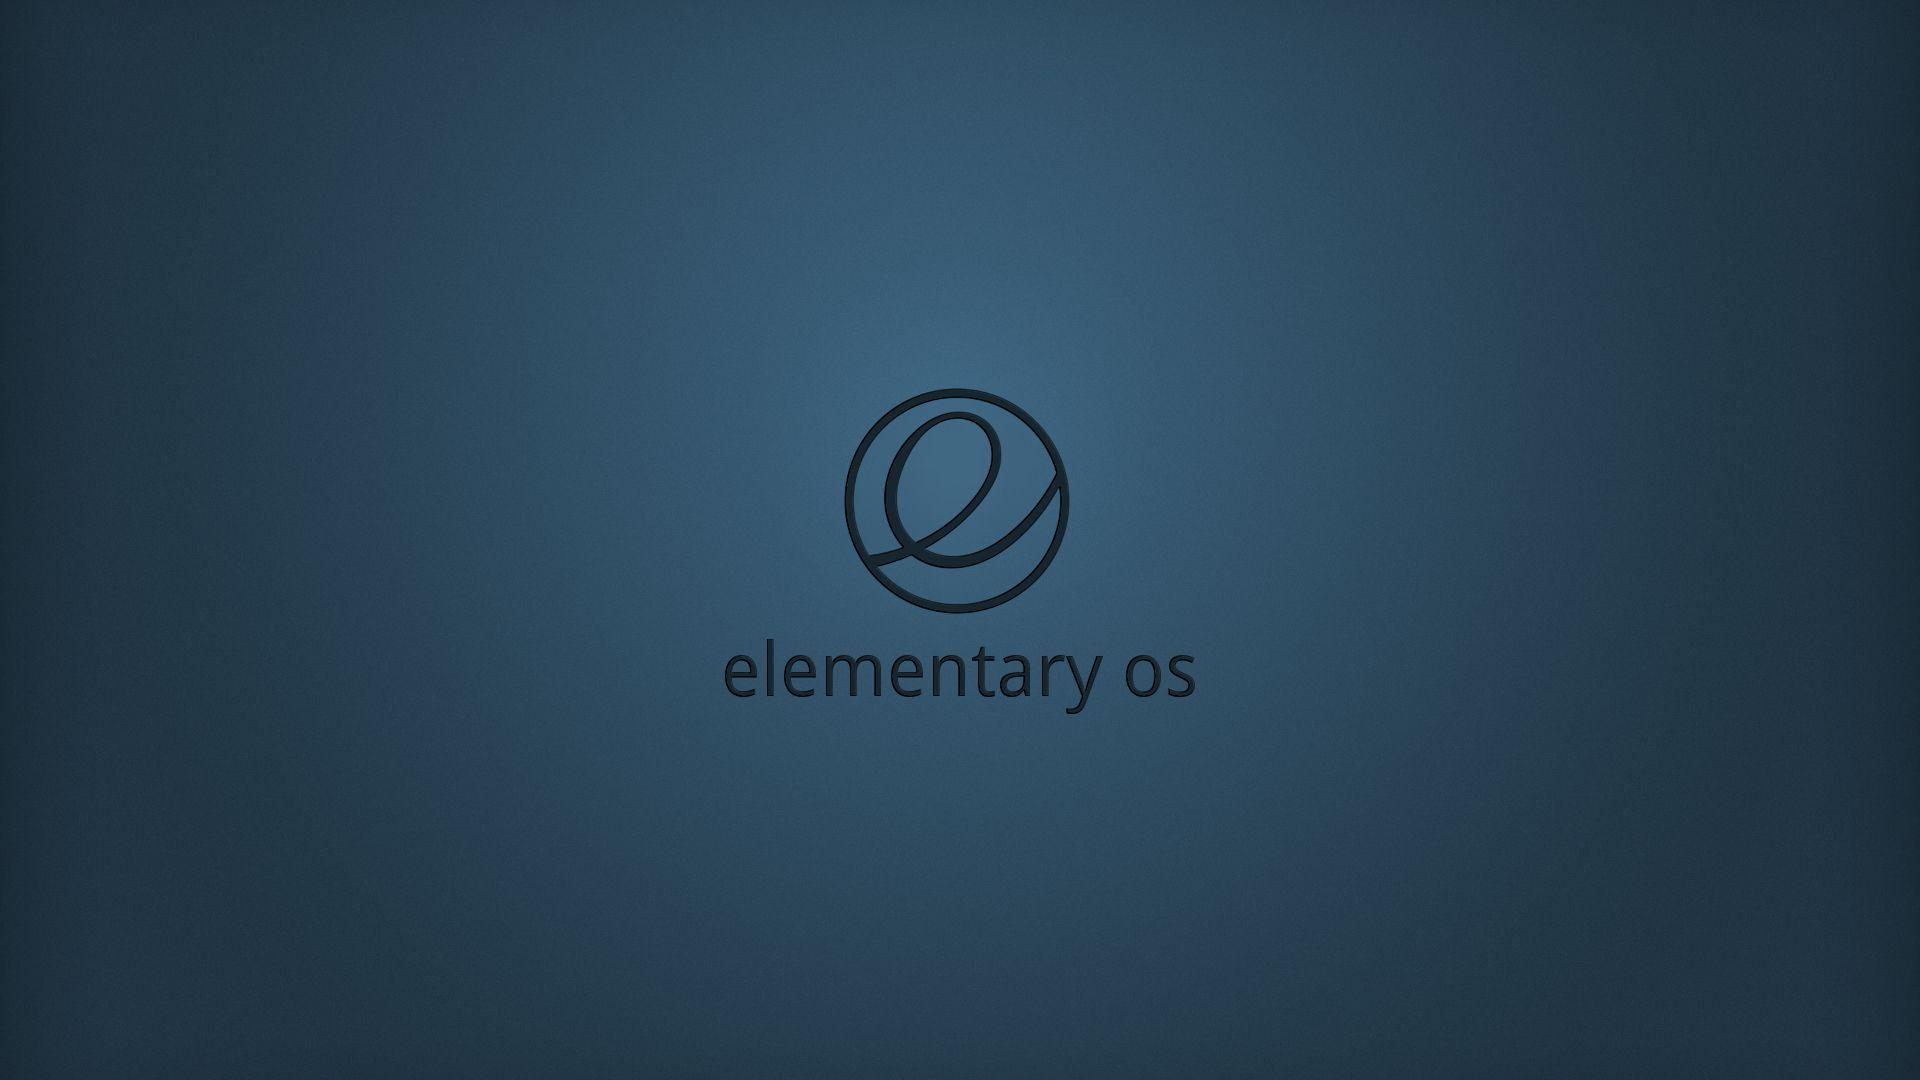 Elementary Os Wallpapers Top Free Elementary Os Backgrounds Wallpaperaccess